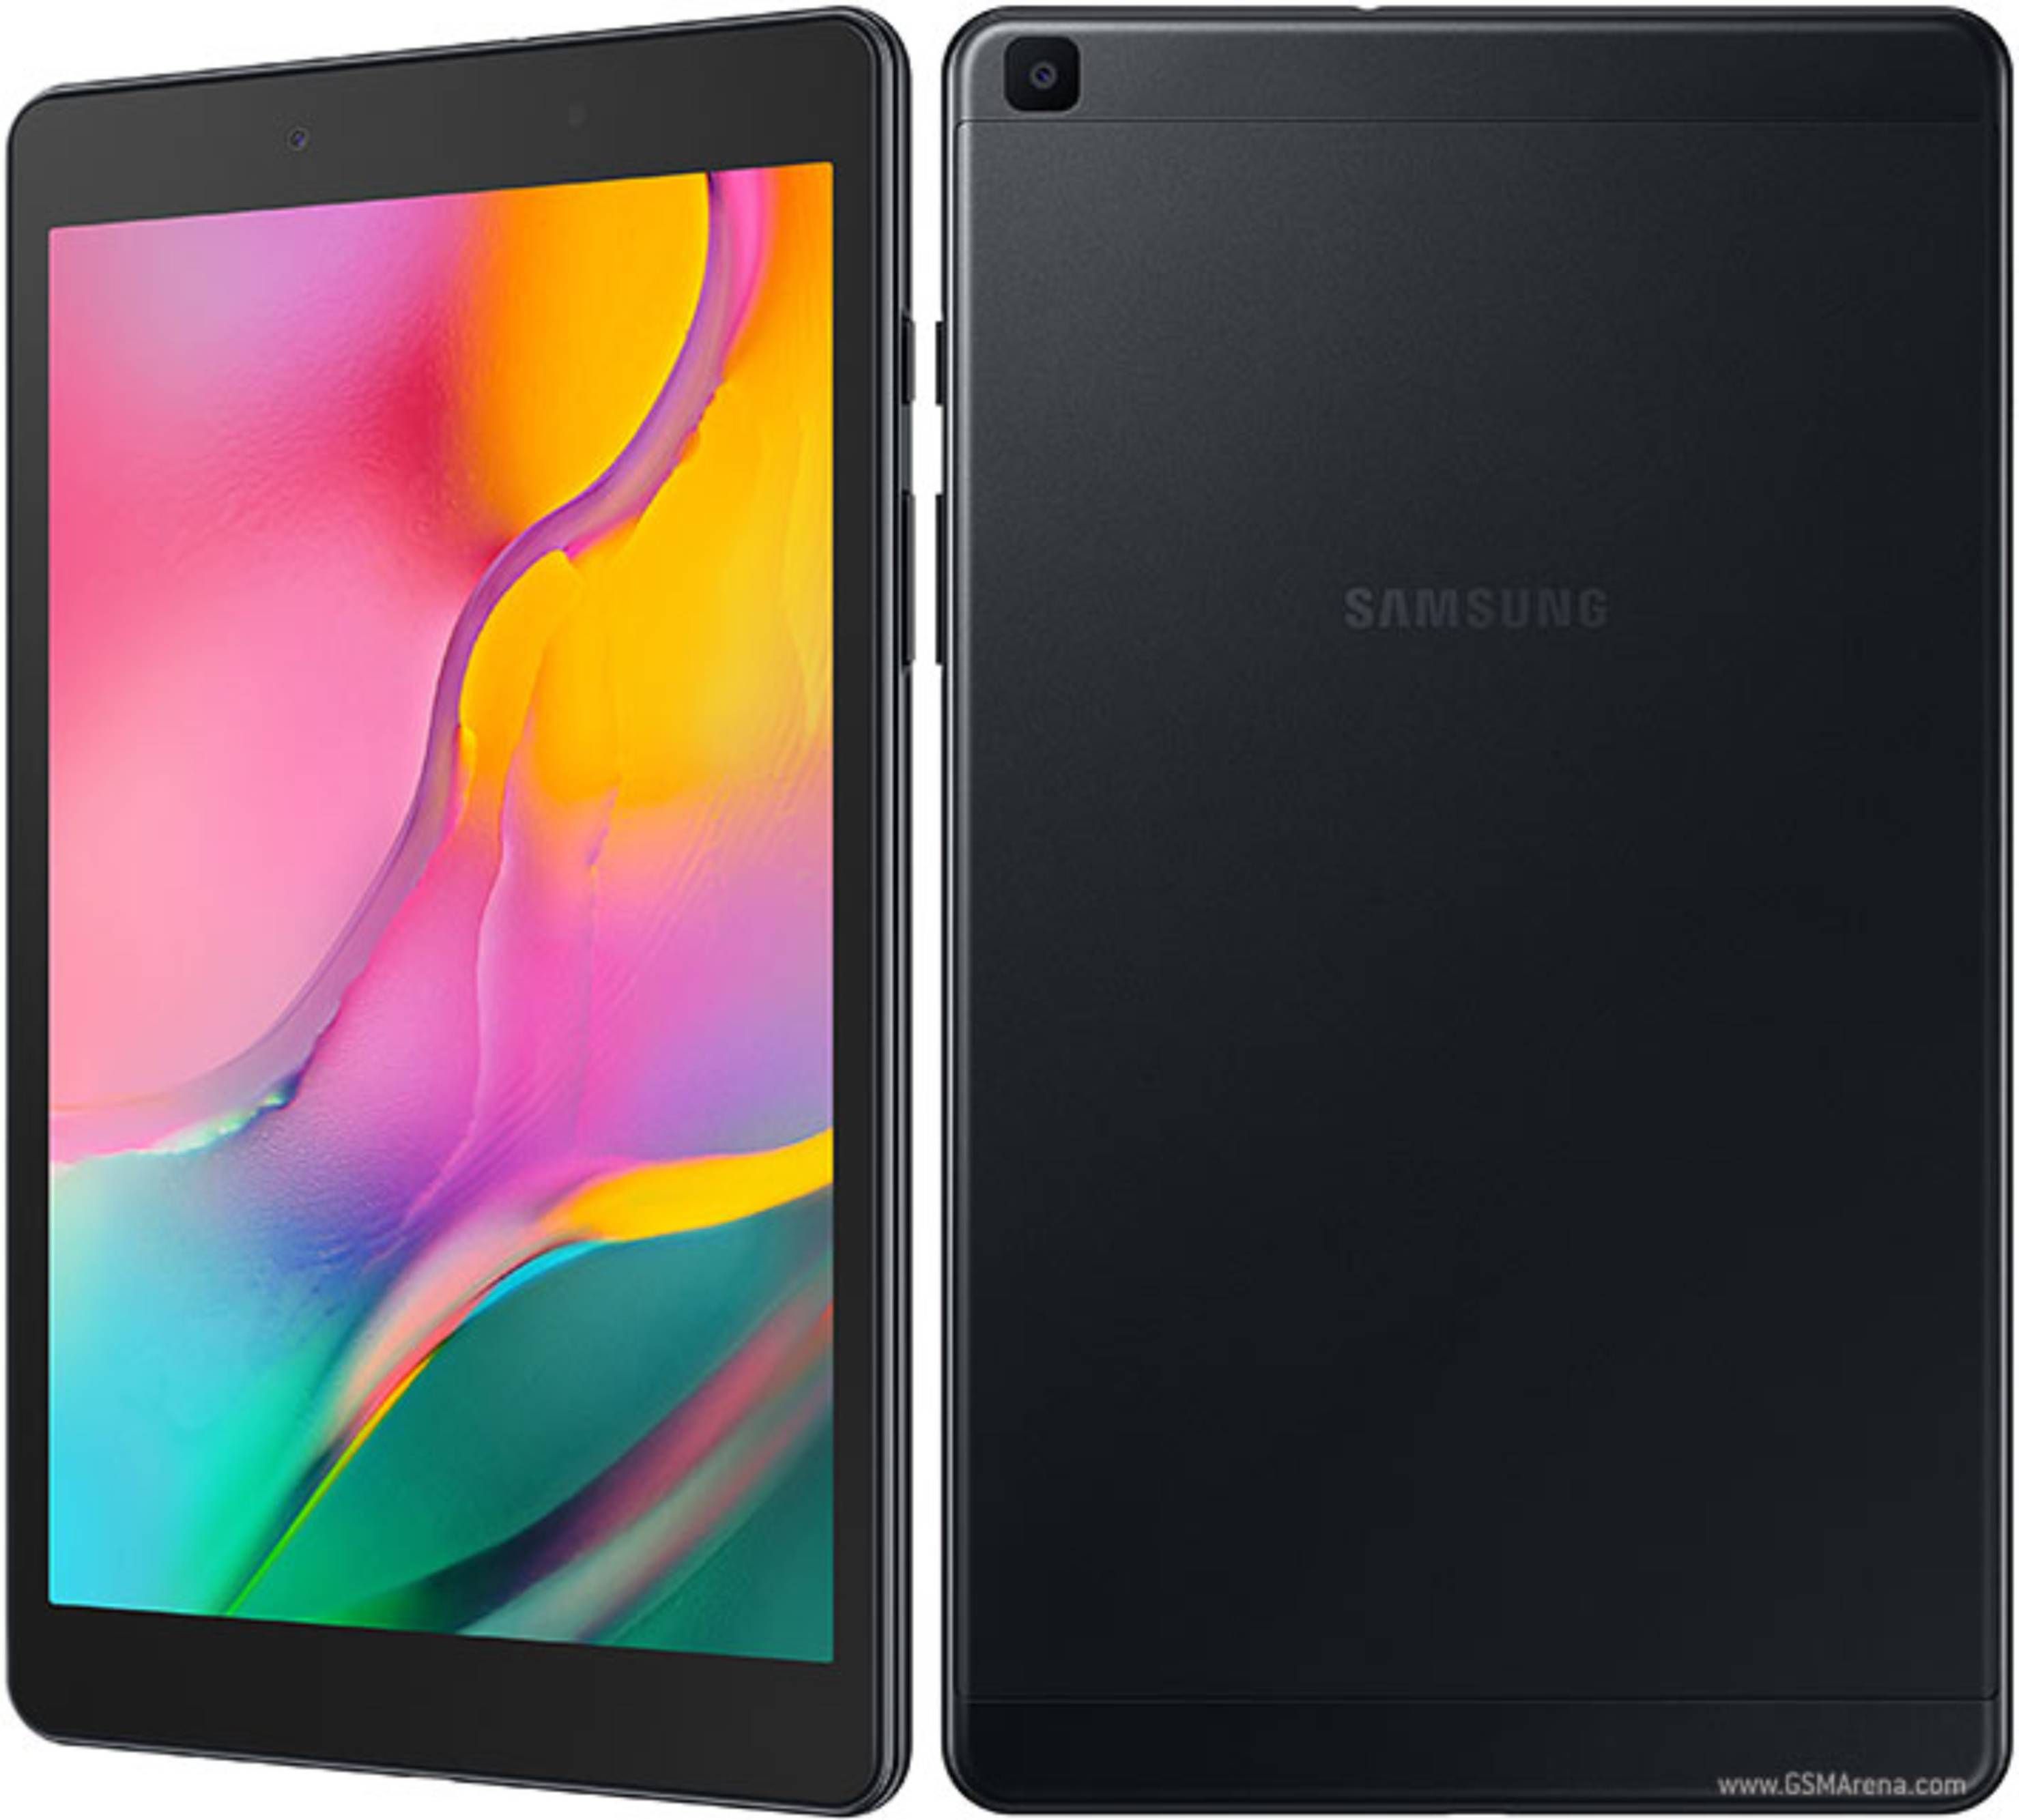 Samsung Galaxy Tab A 8.0 (2019) Specifications and Price in Kenya